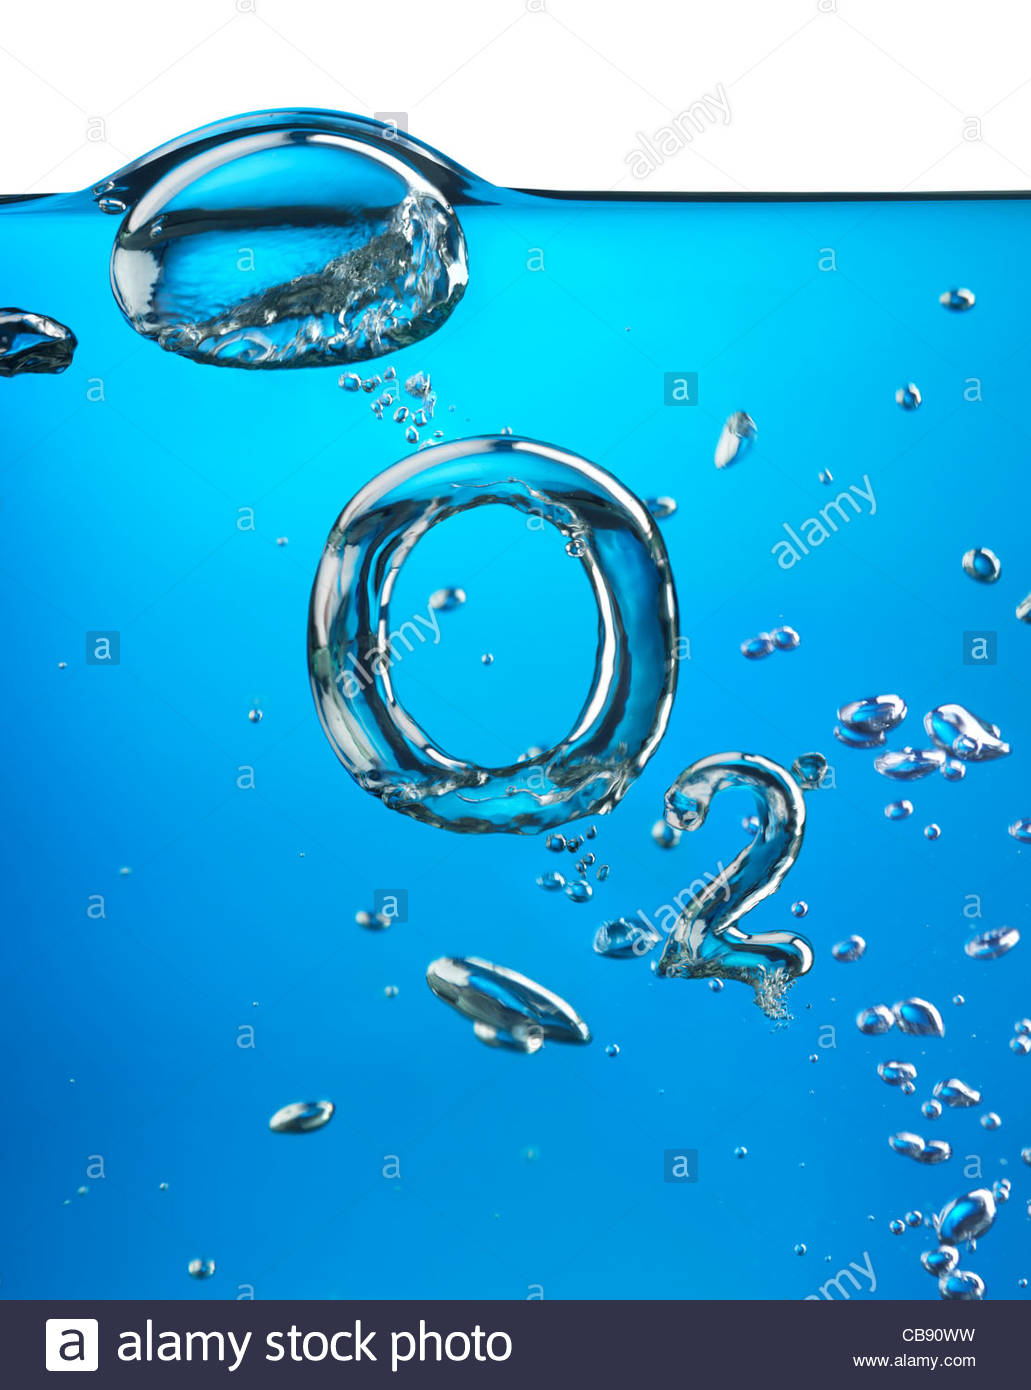 Formula Of Oxygen O2 With Air Bubbles Underwater On Blue